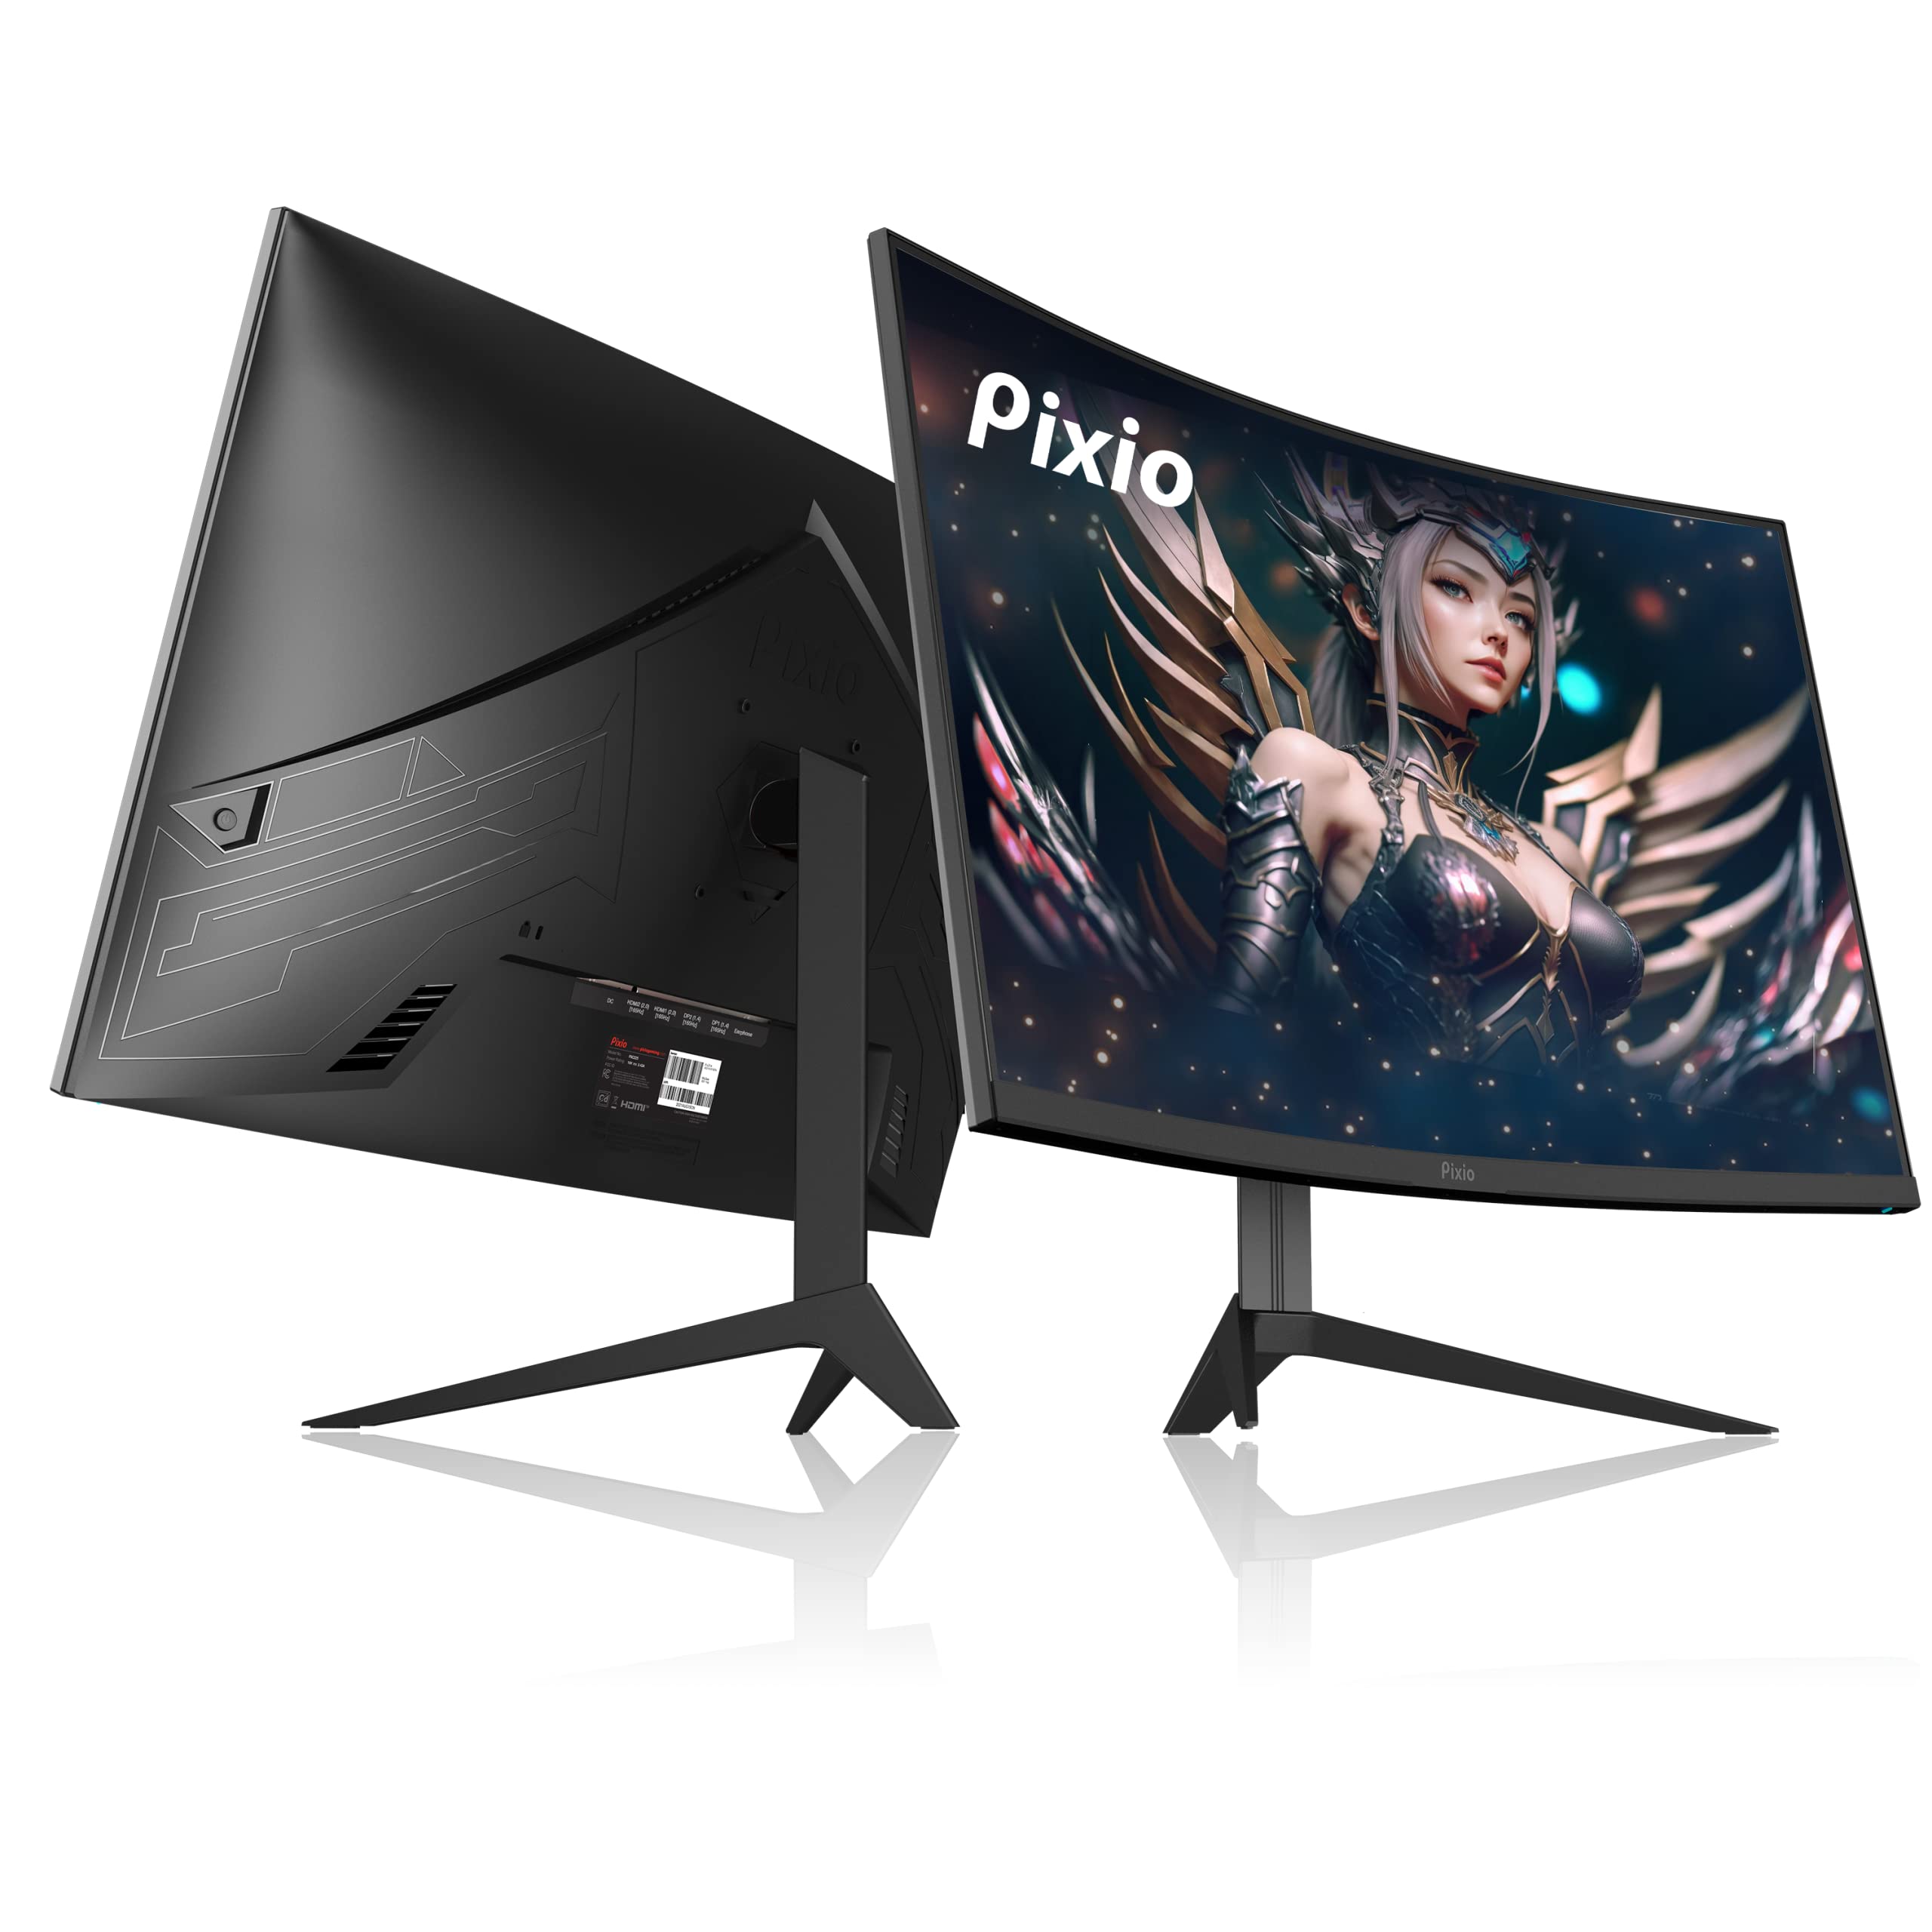 Pixio PXC325 32 inch 1500R Curve VA Panel 1ms MPRT Response Time 165Hz Refresh Rate FHD 1920 x 1080 Resolution DCI-P3 97% Adaptive Sync HDR Curved Gaming Monitor